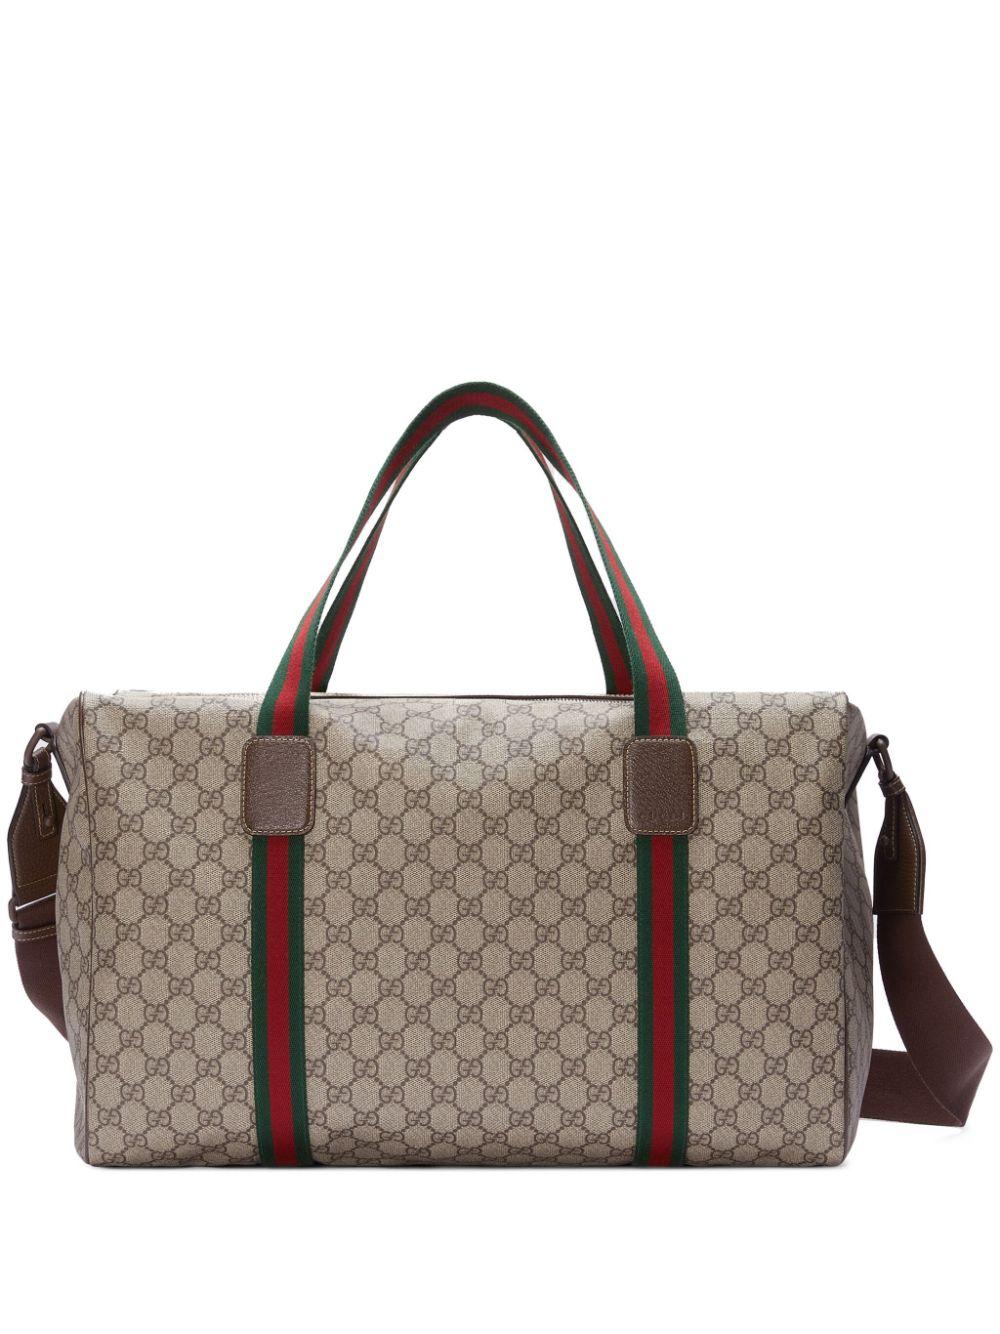 Gucci Brown/Beige GG Supreme Canvas and Leather Neo Vintage Web Duffle Bag  Gucci